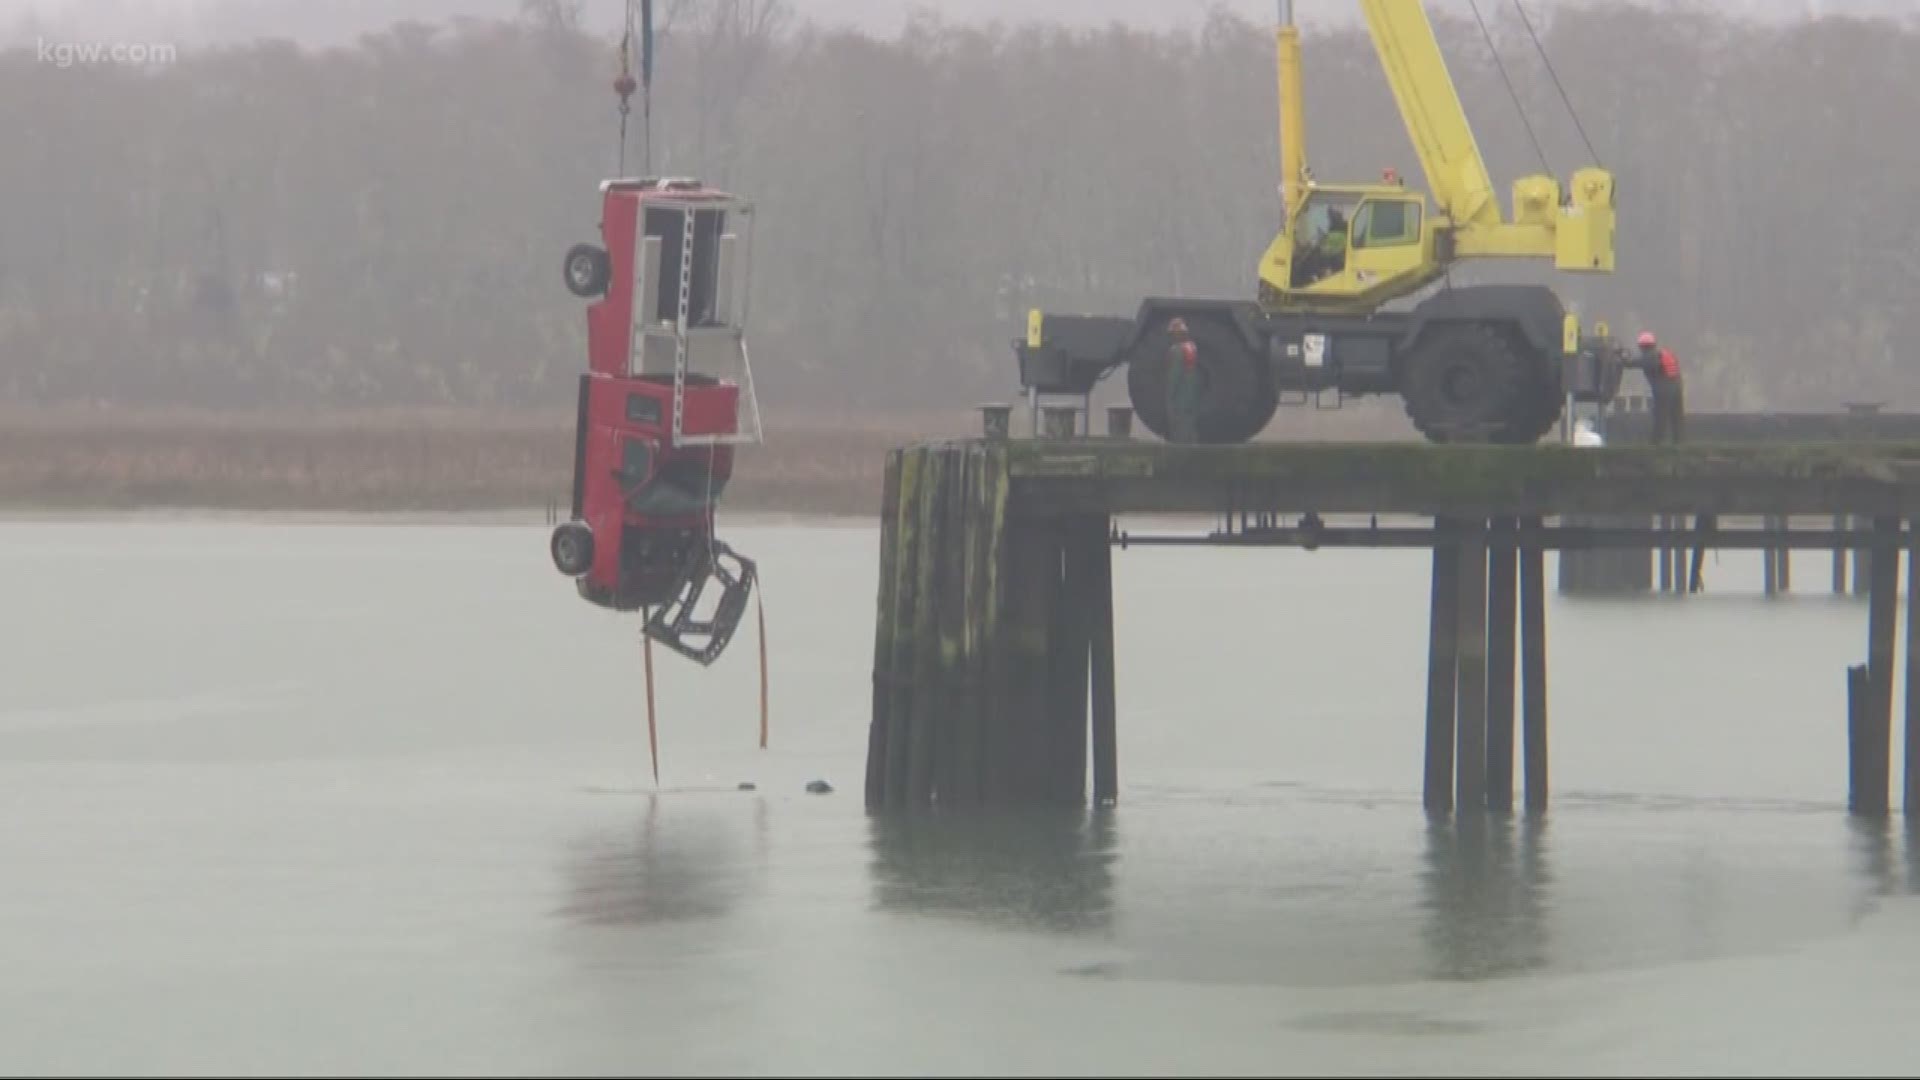 A man running from police drove off a pier in Astoria, plunging into frigid water.